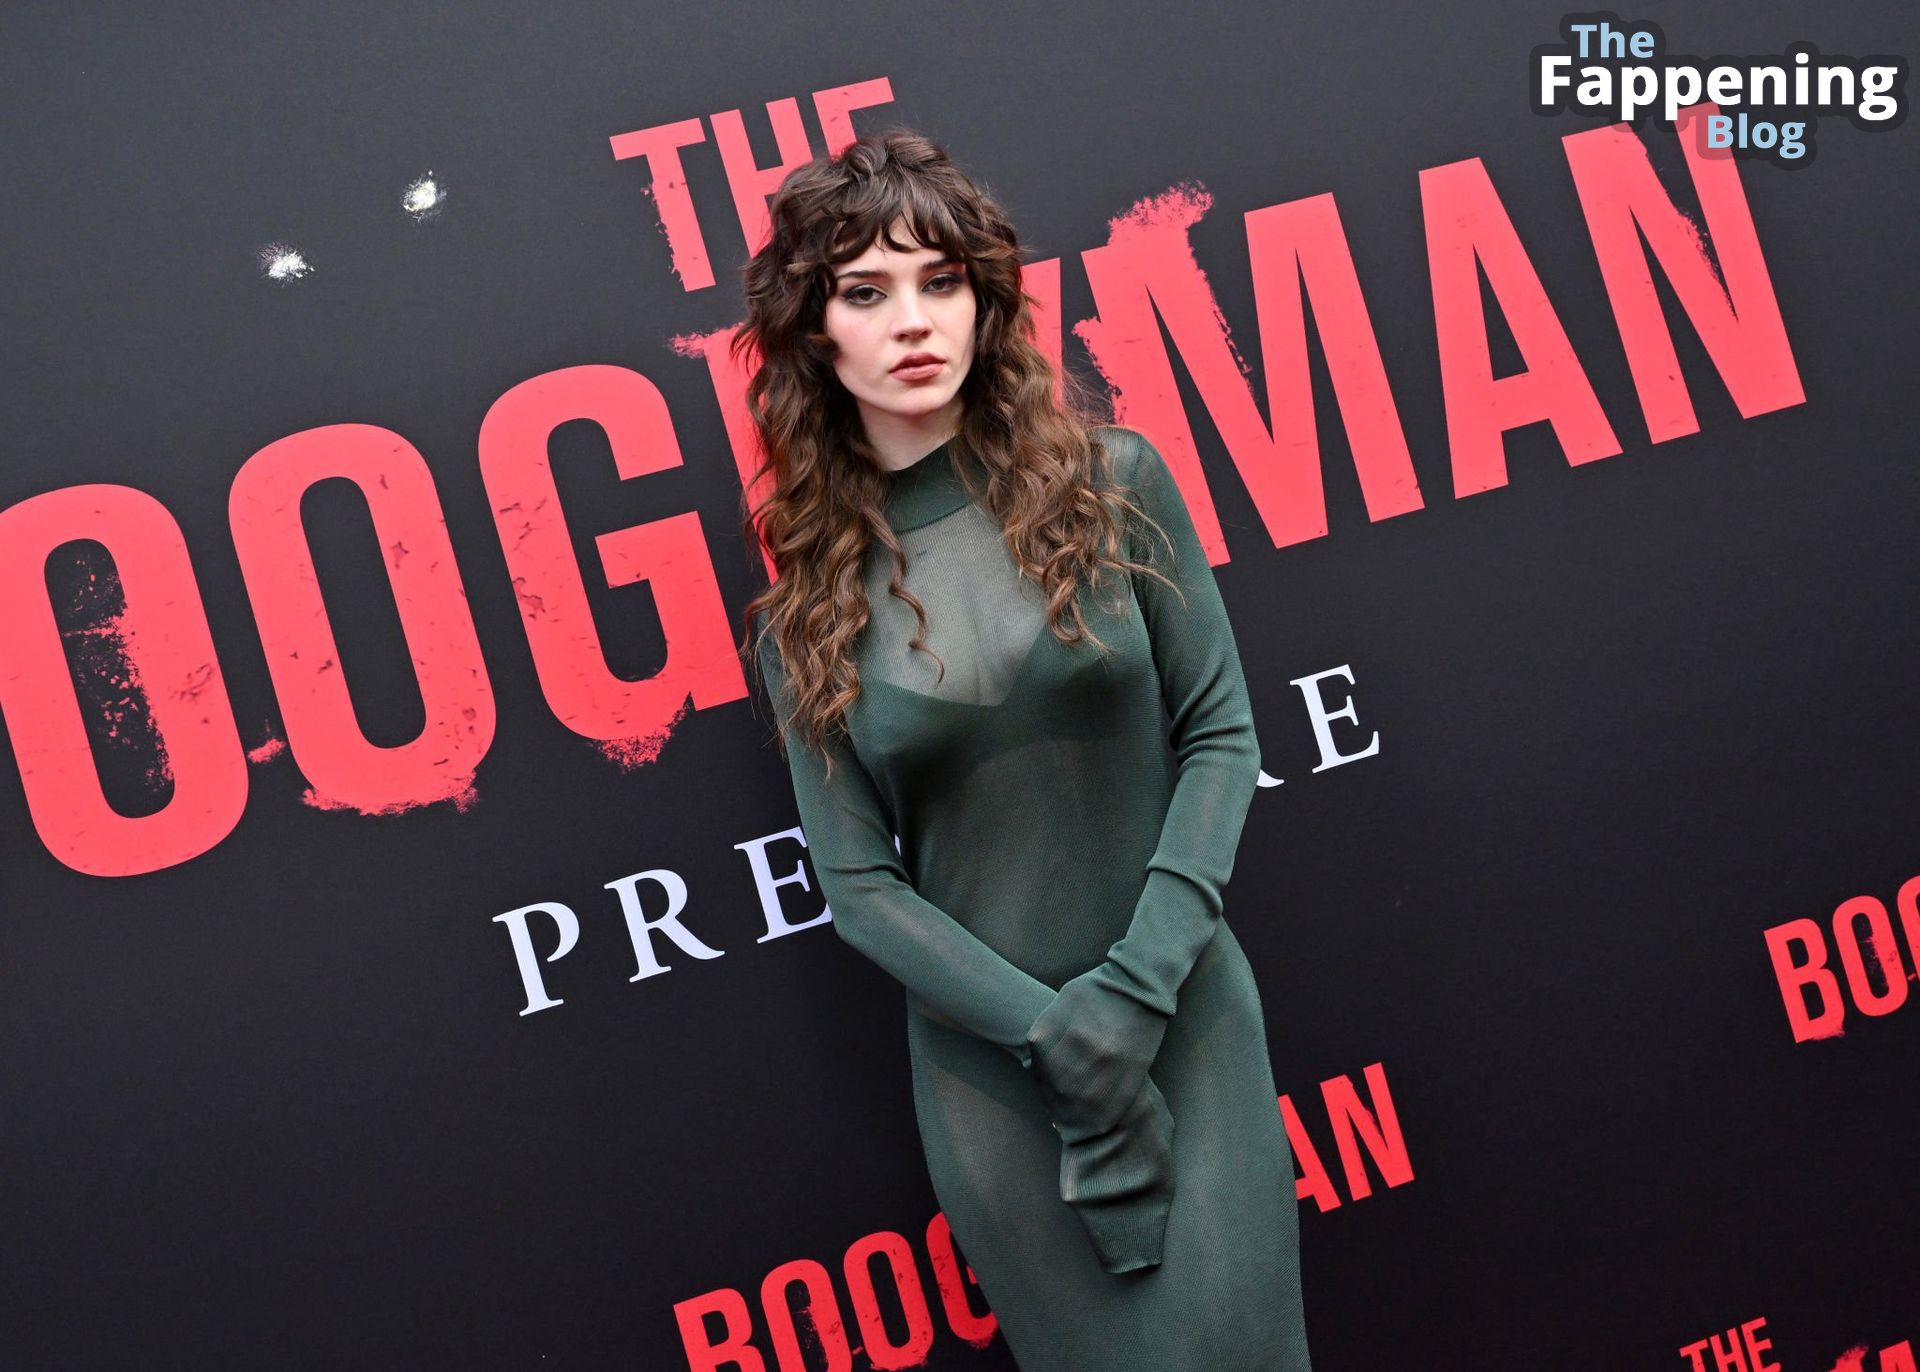 Sophie Thatcher Looks Sexy in a See-Through Dress at “The Boogeyman” Premiere in Hollywood (56 Photos)